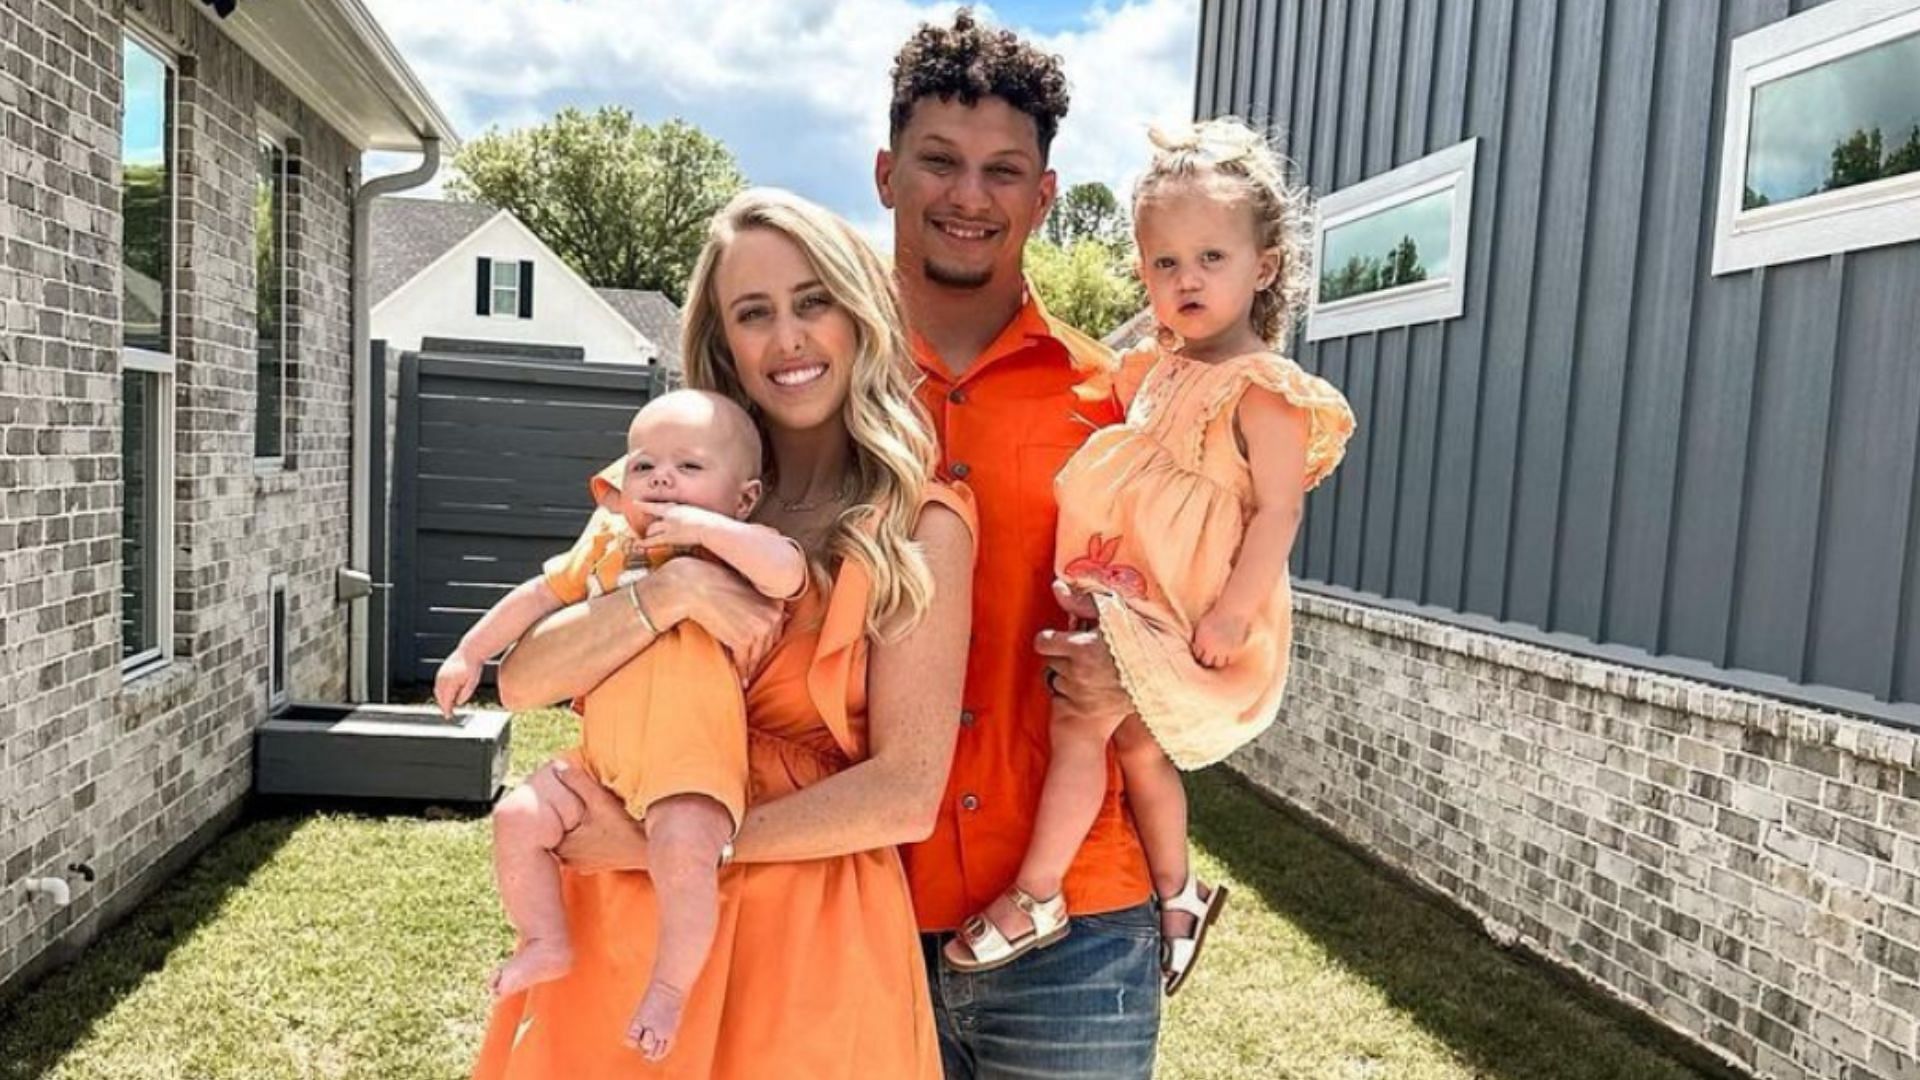 Patrick Mahomes with his wife, Brittany, and their two kids, Sterling Skye and Patrick III